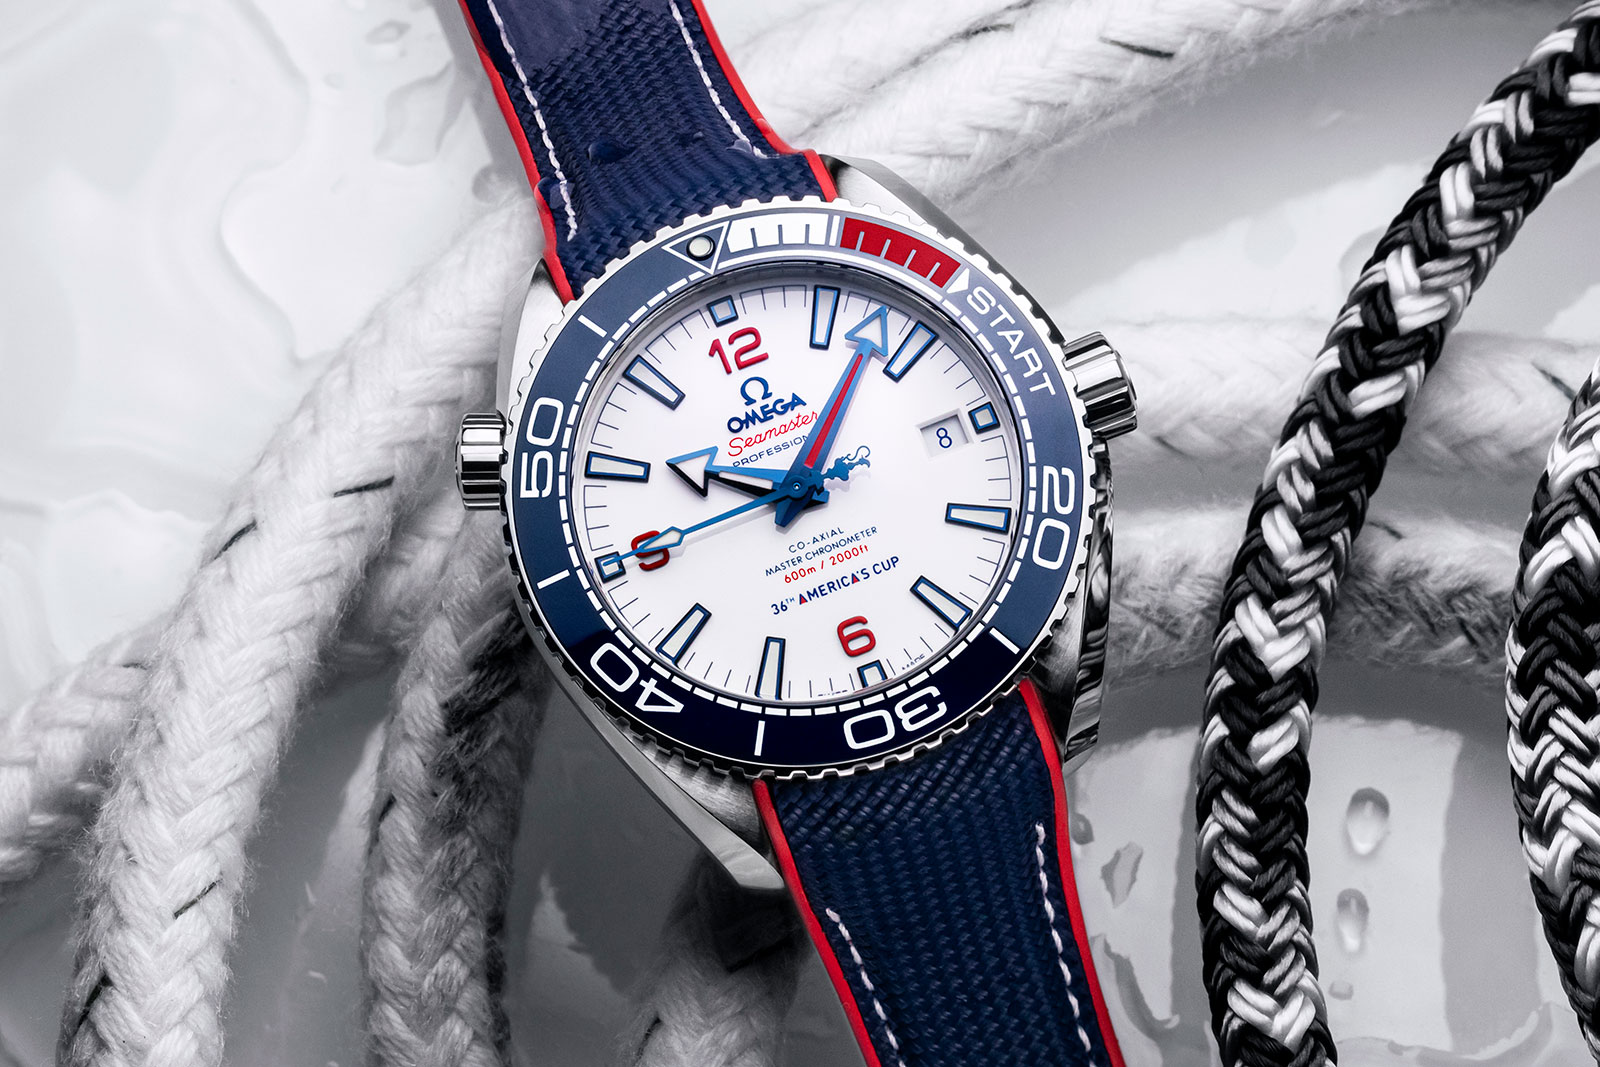 Hands-On With The Omega Seamaster Planet Ocean For The 36th America's Cup